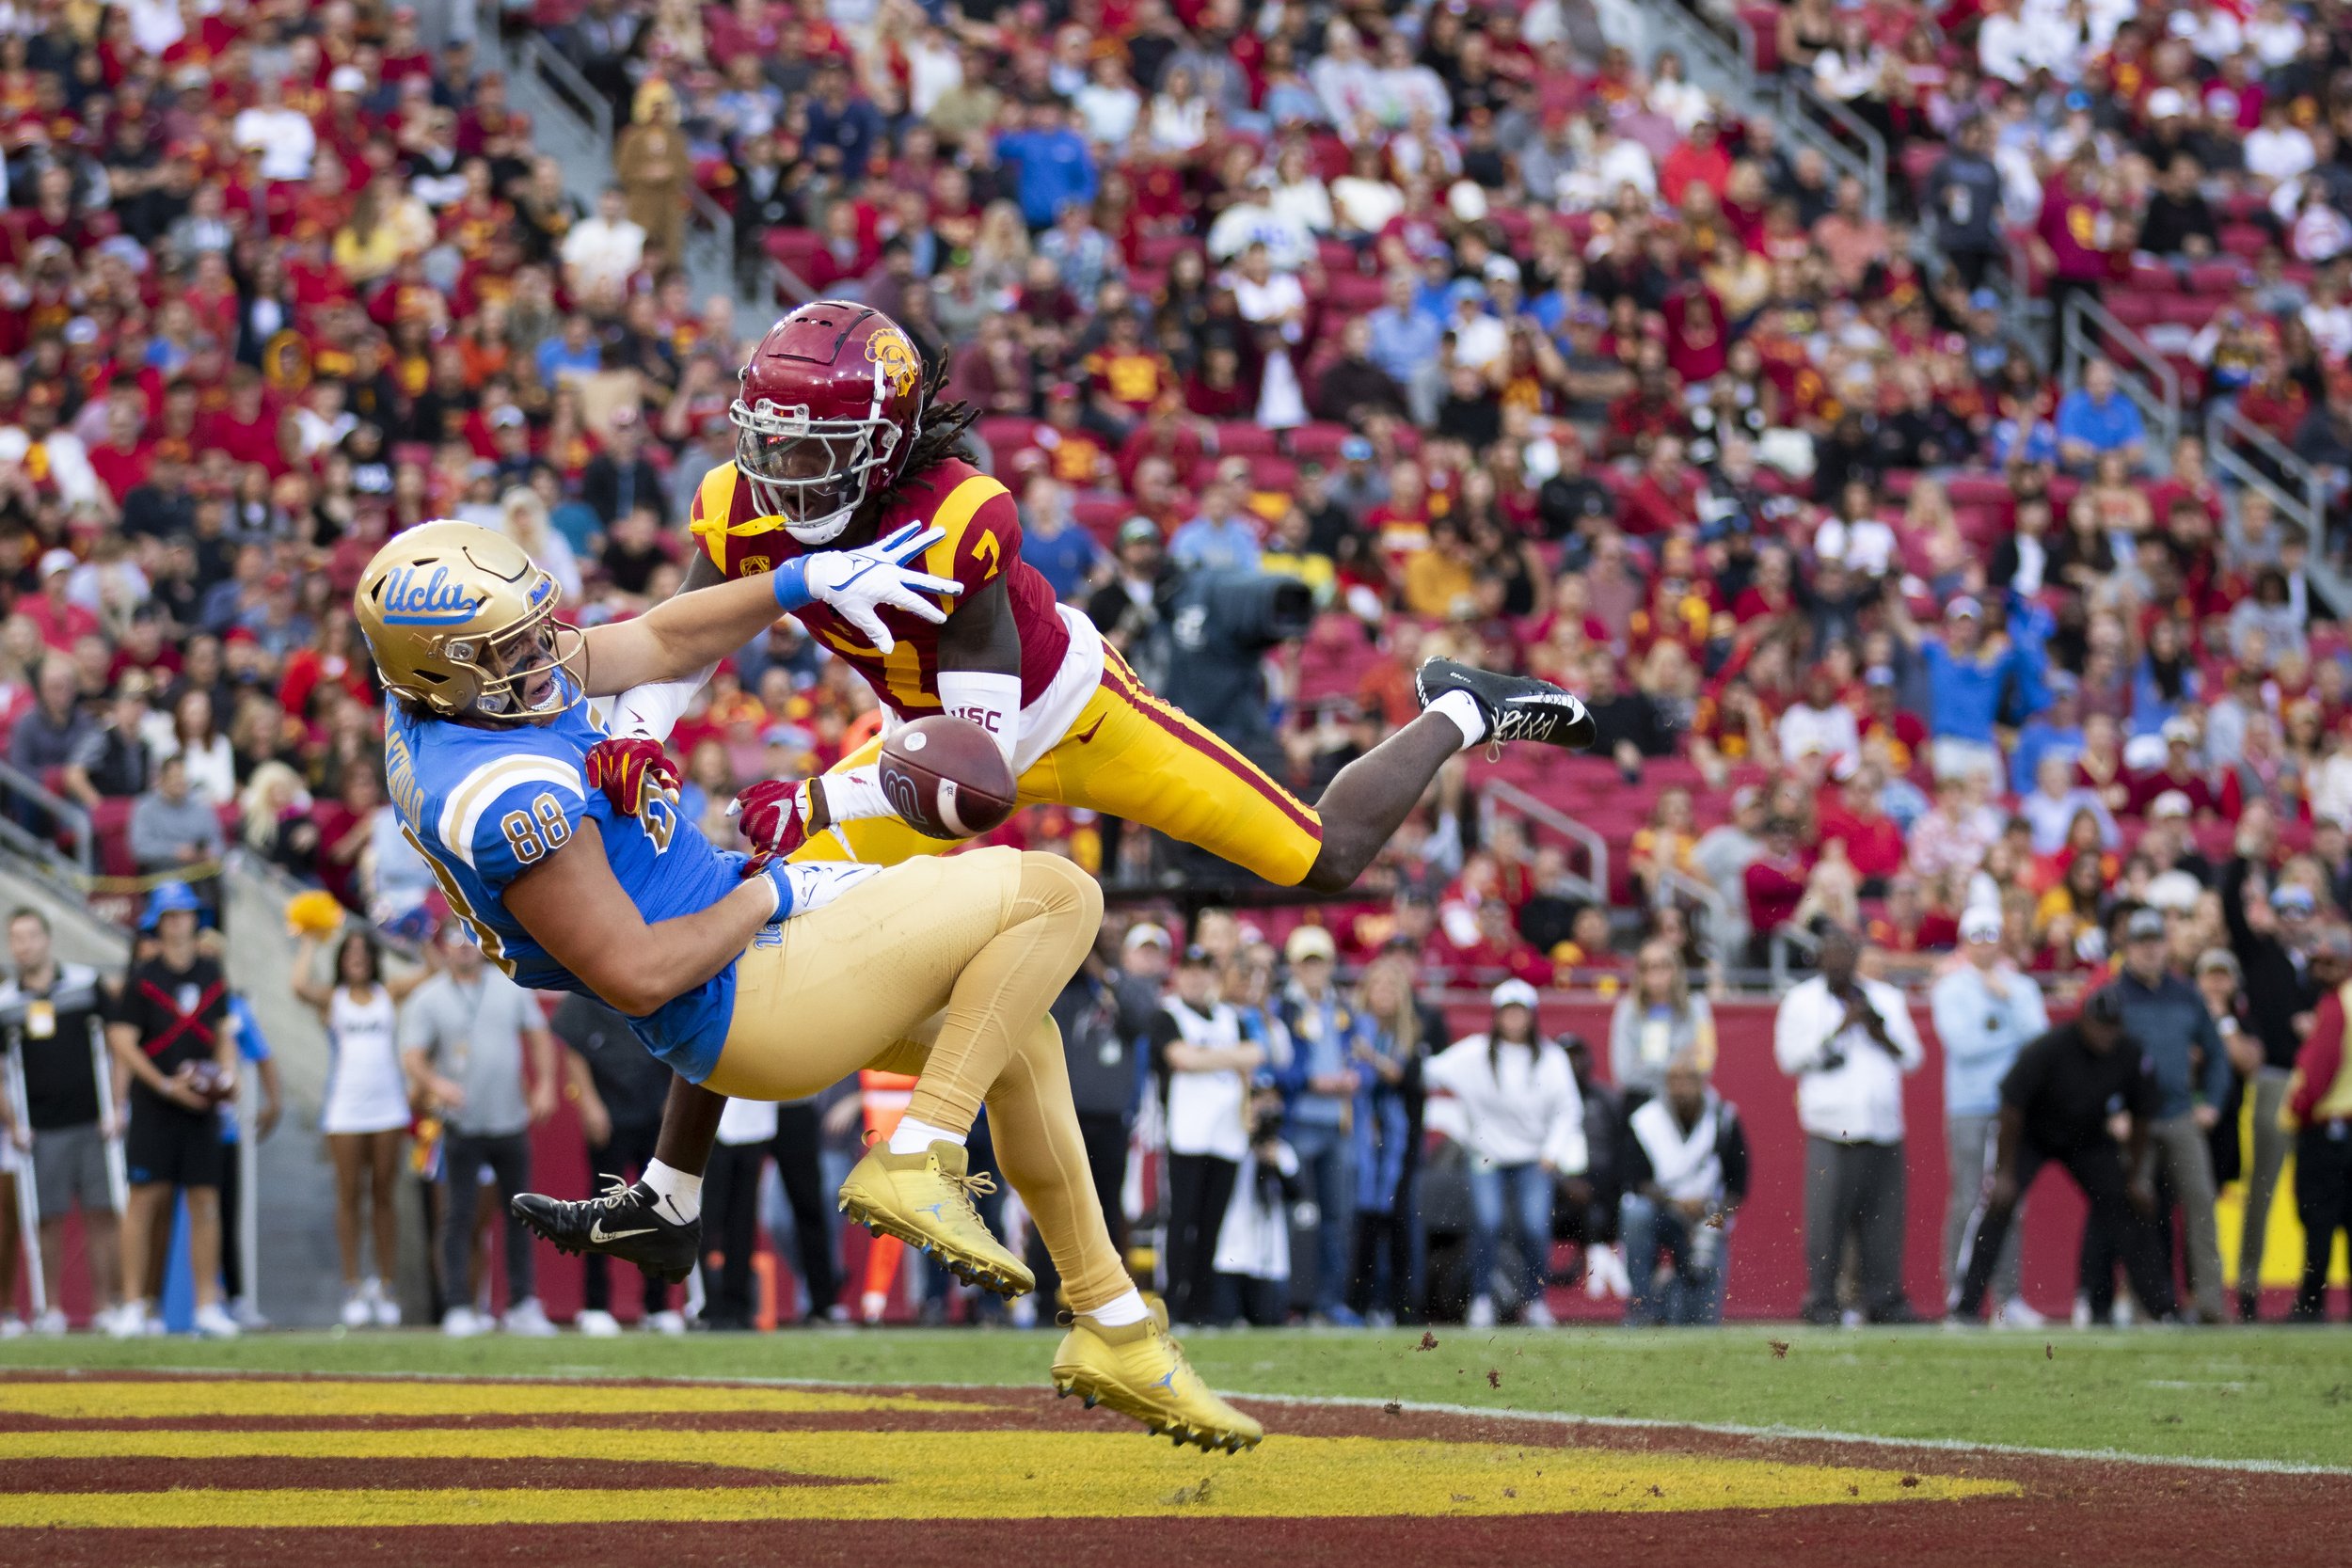  University of California, Los Angeles (UCLA) Bruin tight end Moliki Matavao (left) being tackled in the end zone by University of Southern California (USC) Trojan safety Calen Bullock (right) during the first quarter of a football game at the Los An